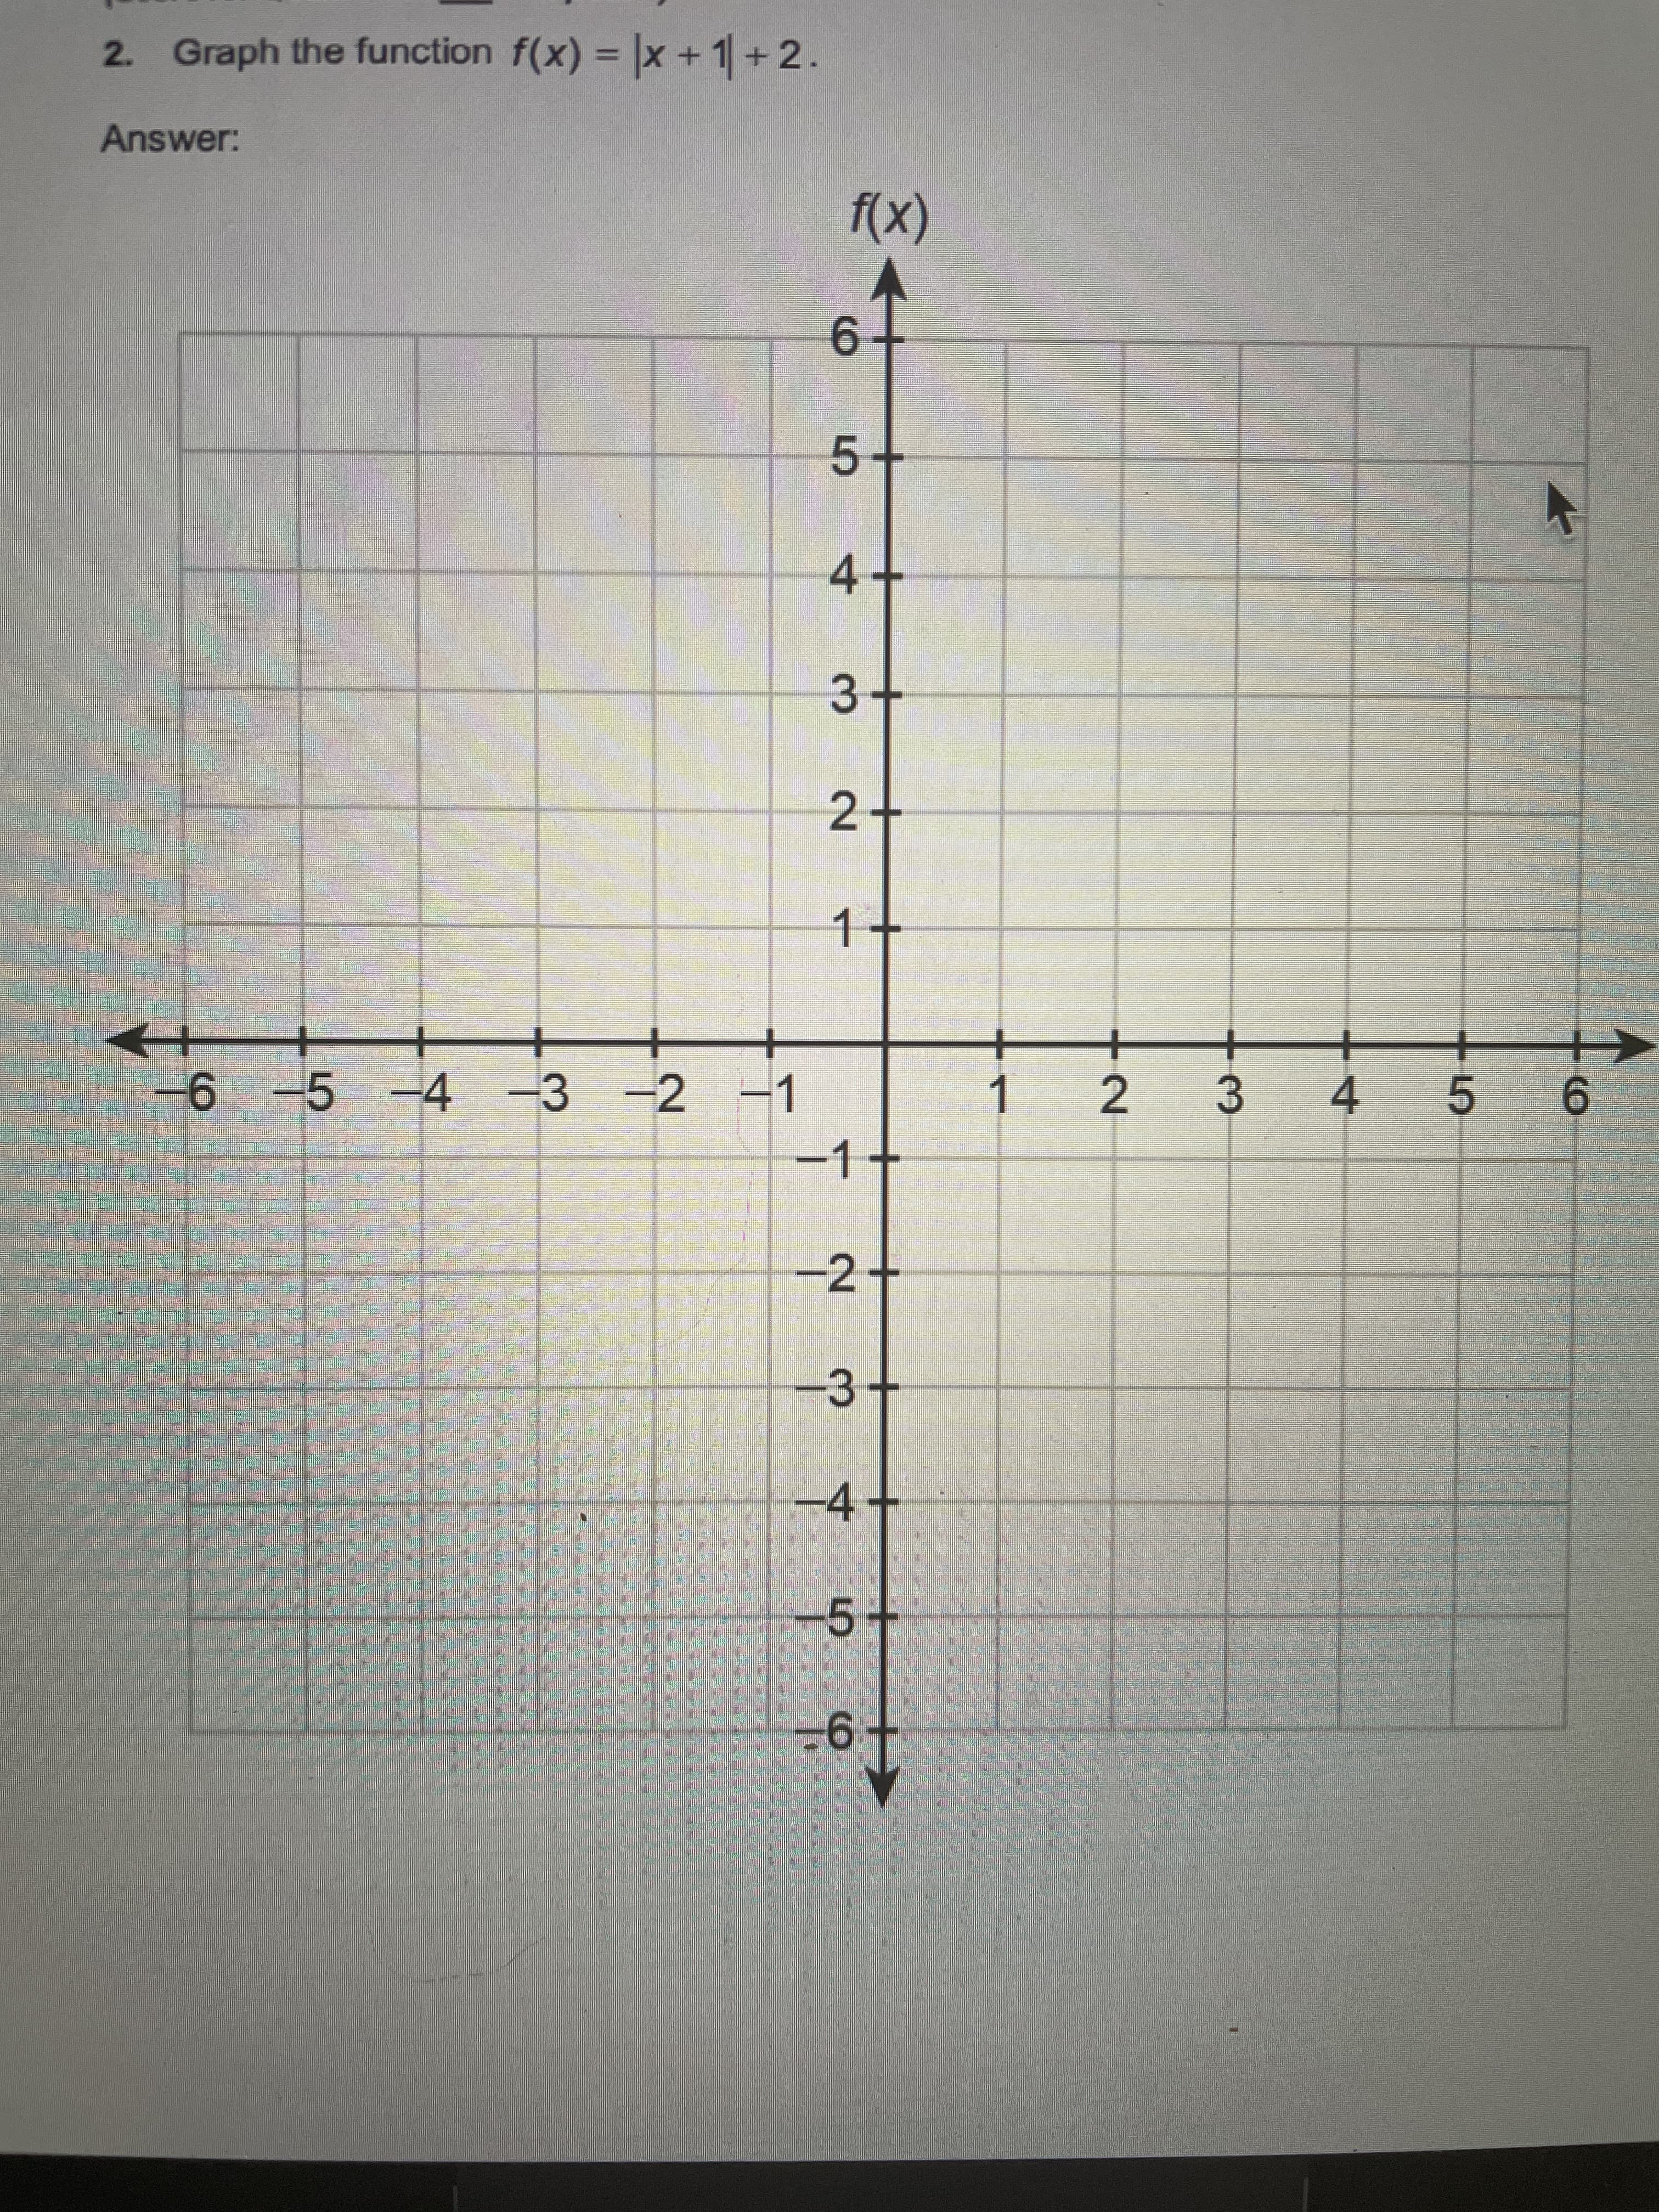 Graph the function f(x) = |x +1+2.
